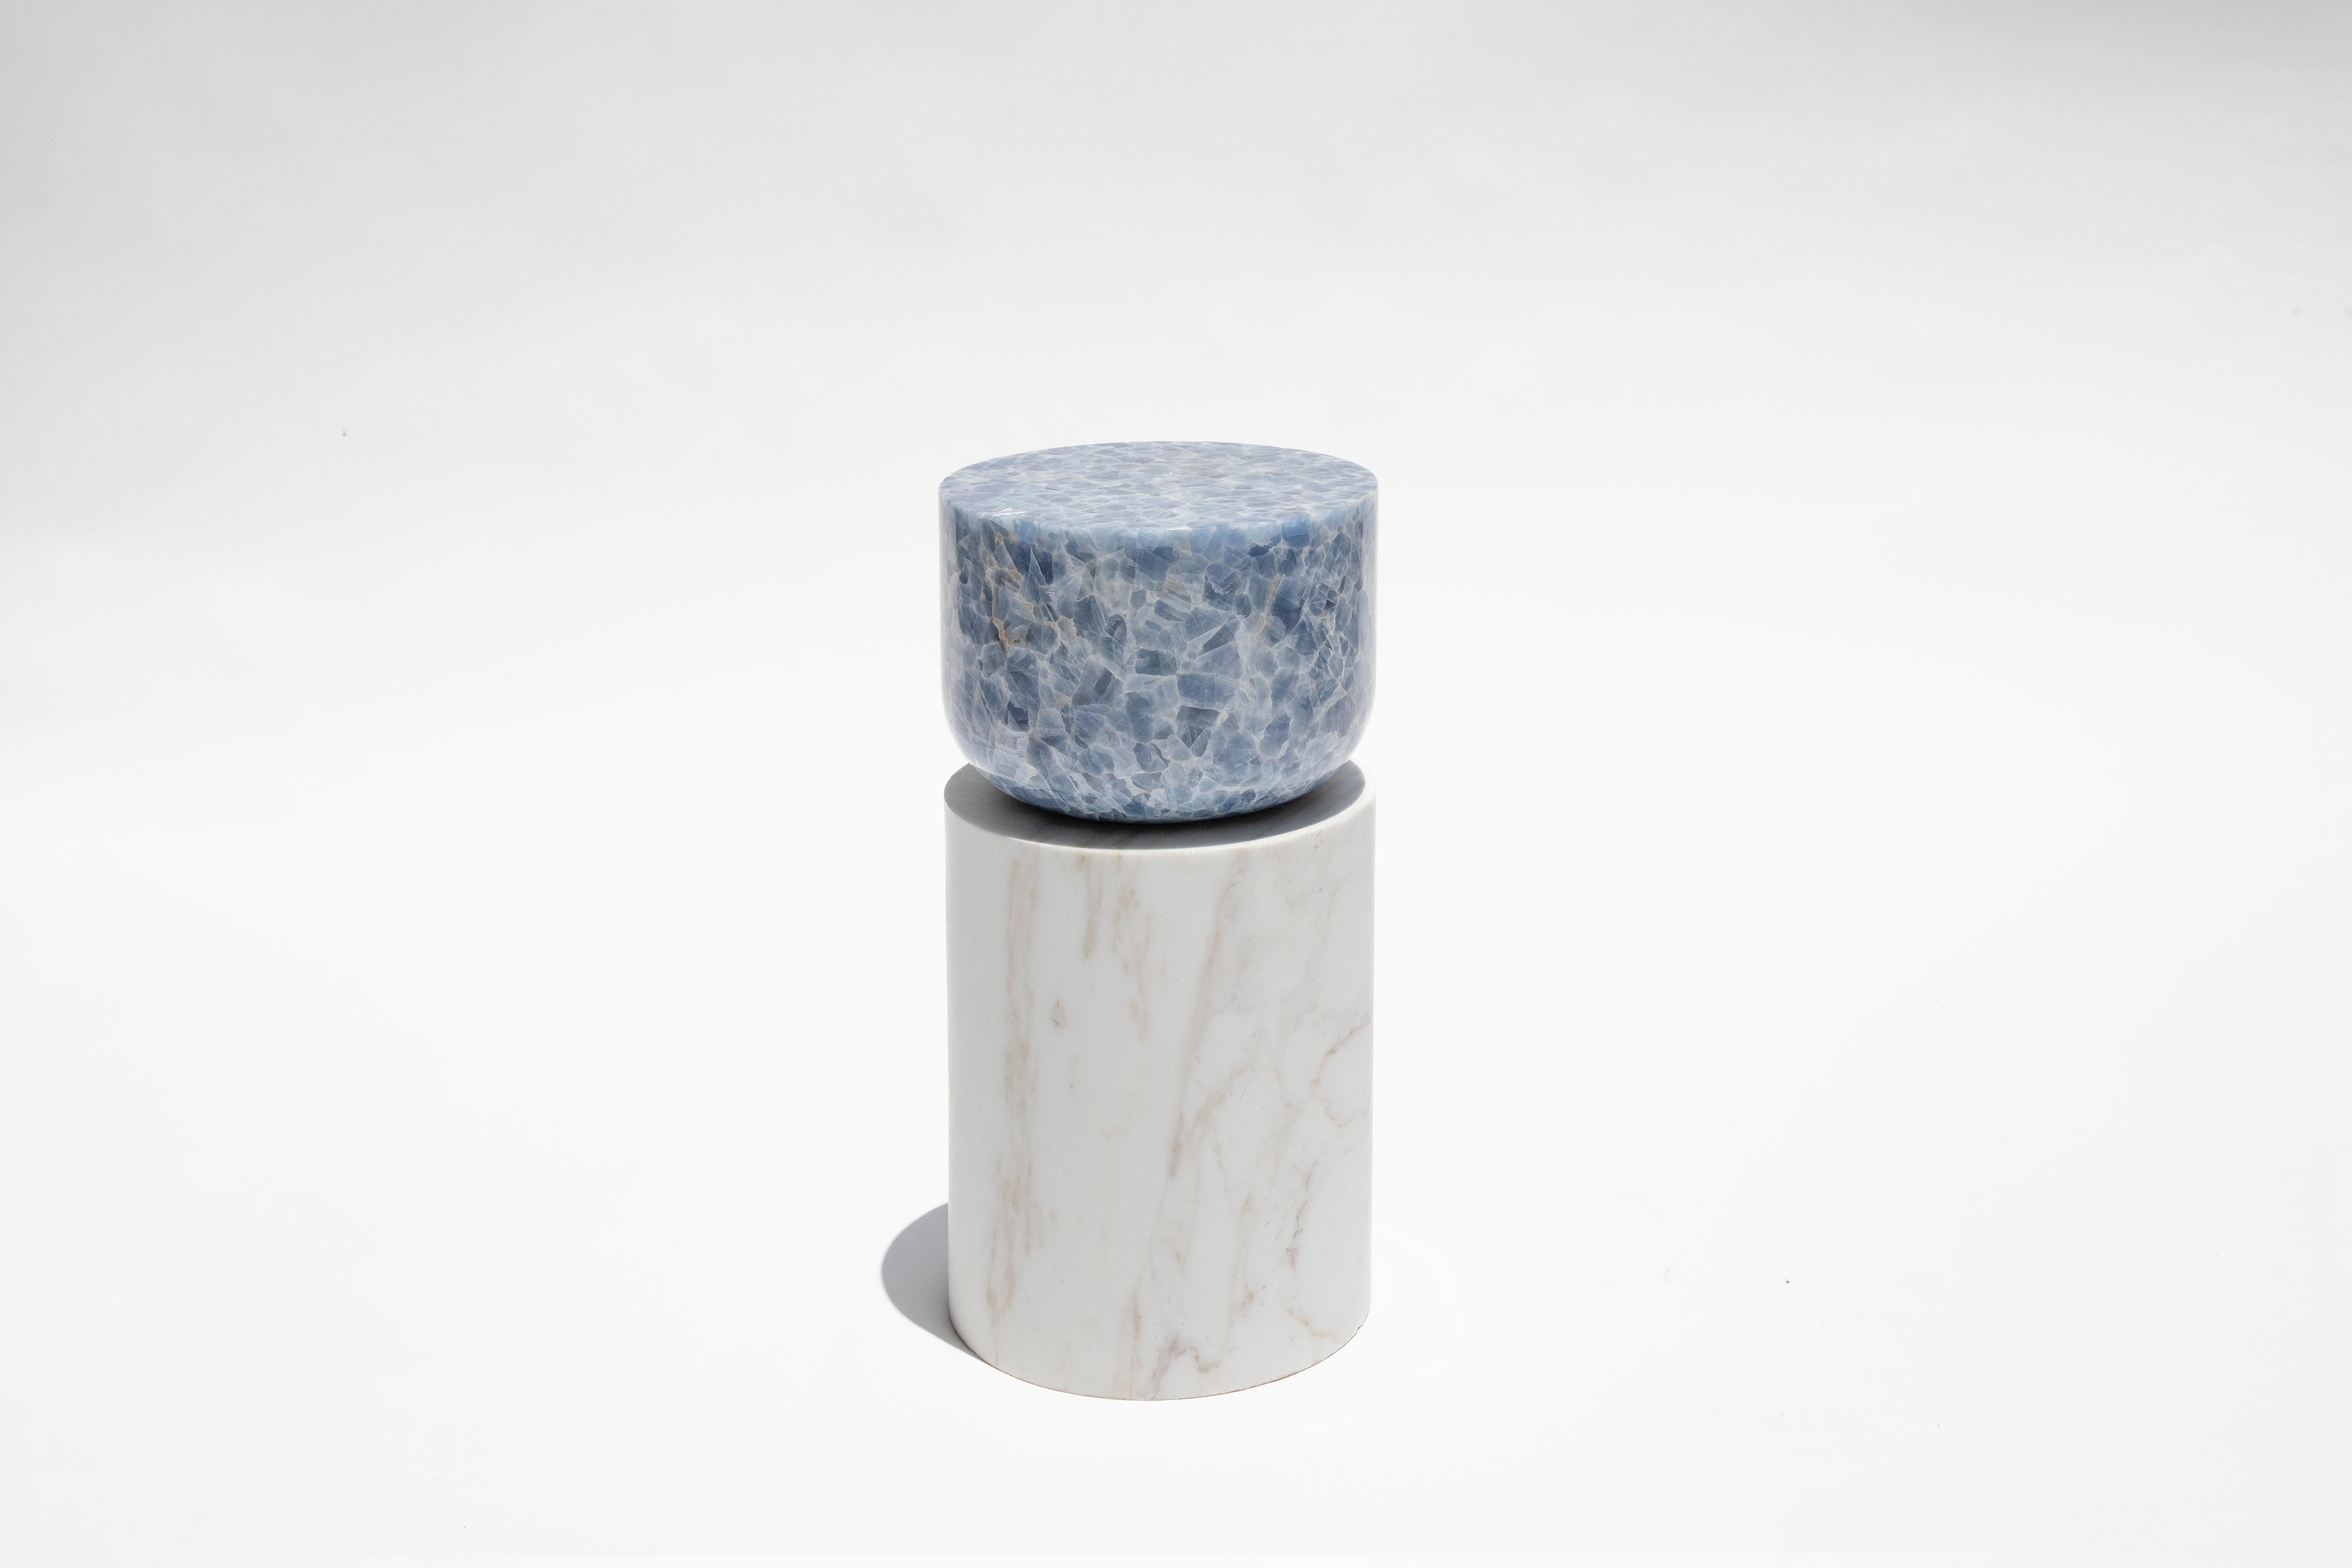 Organic Modern Volcanic Shade of Marble V Stool/Table by Sten Studio, REP by Tuleste Factory